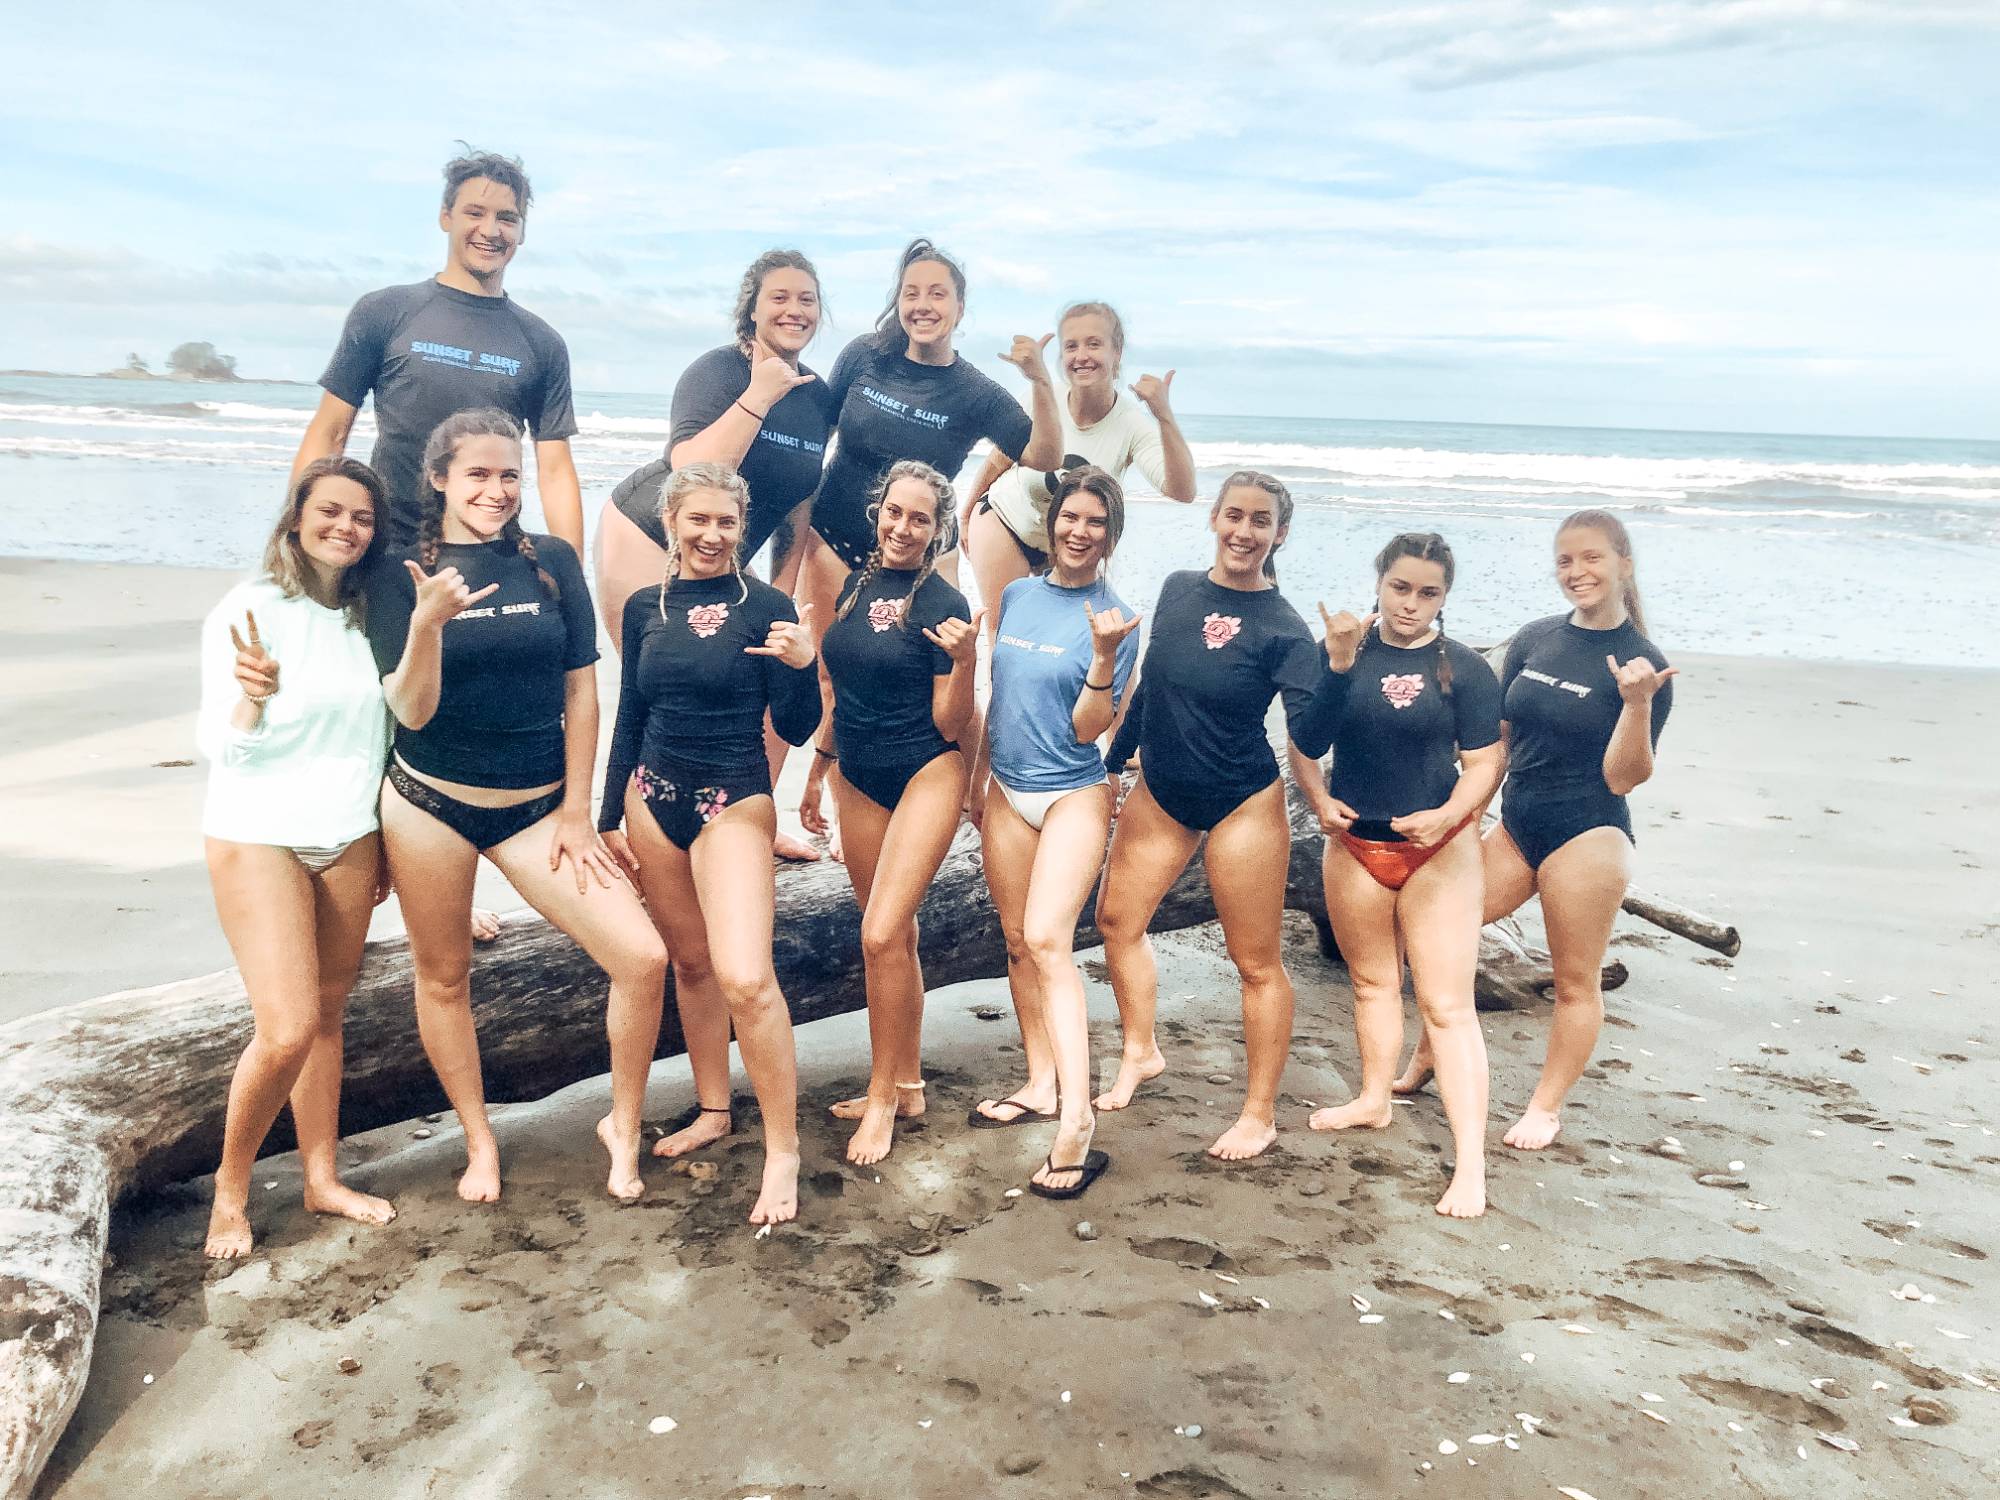 2019 GVSU HTM Costa Rica students wearing wetsuits on the beach before surfing lessons